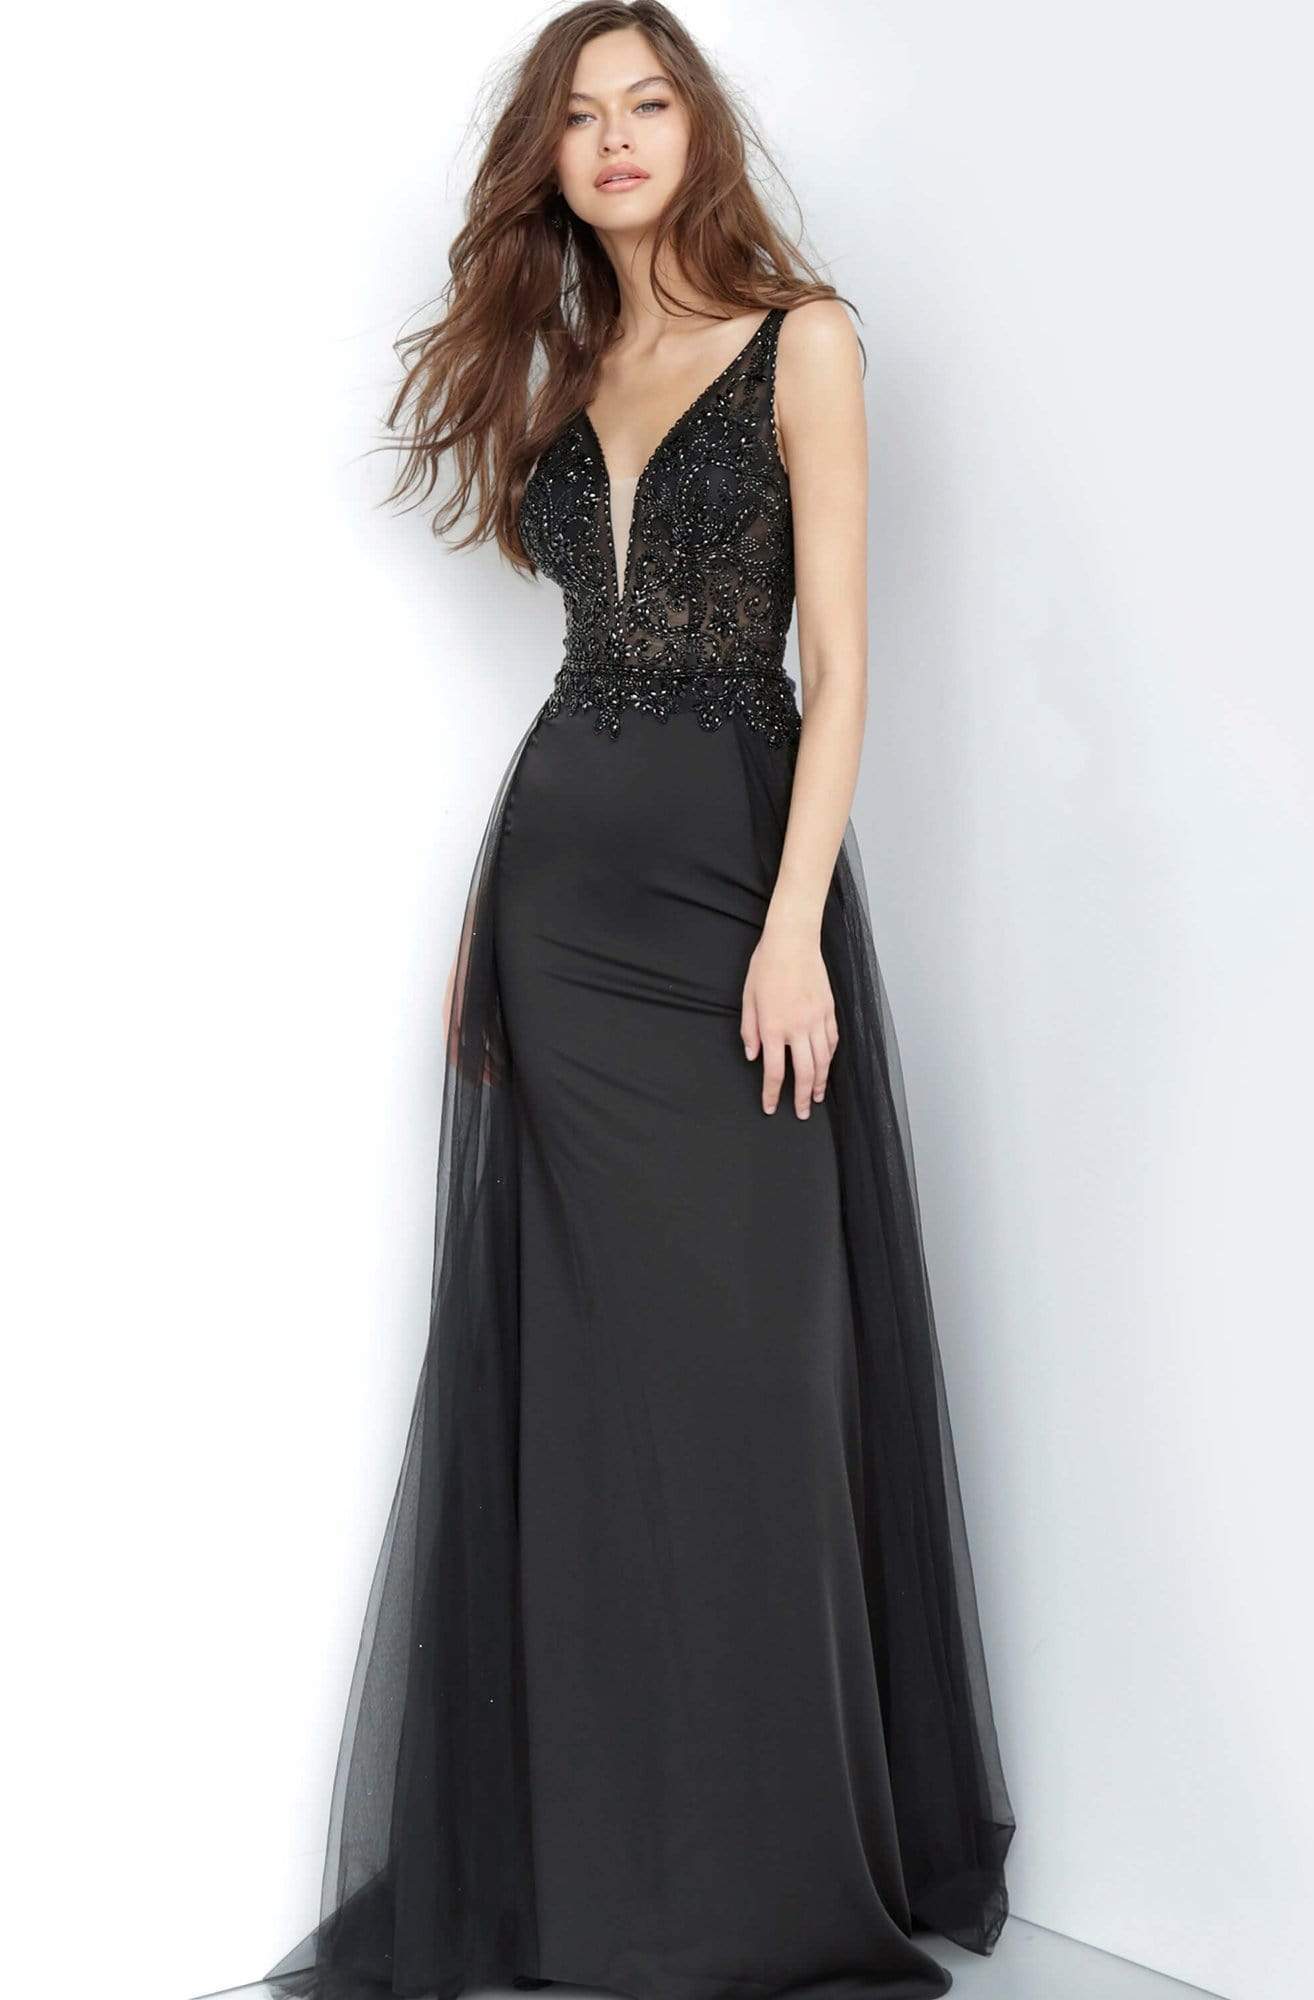 Black Dresses - Ball Gowns ☀ Formal ...